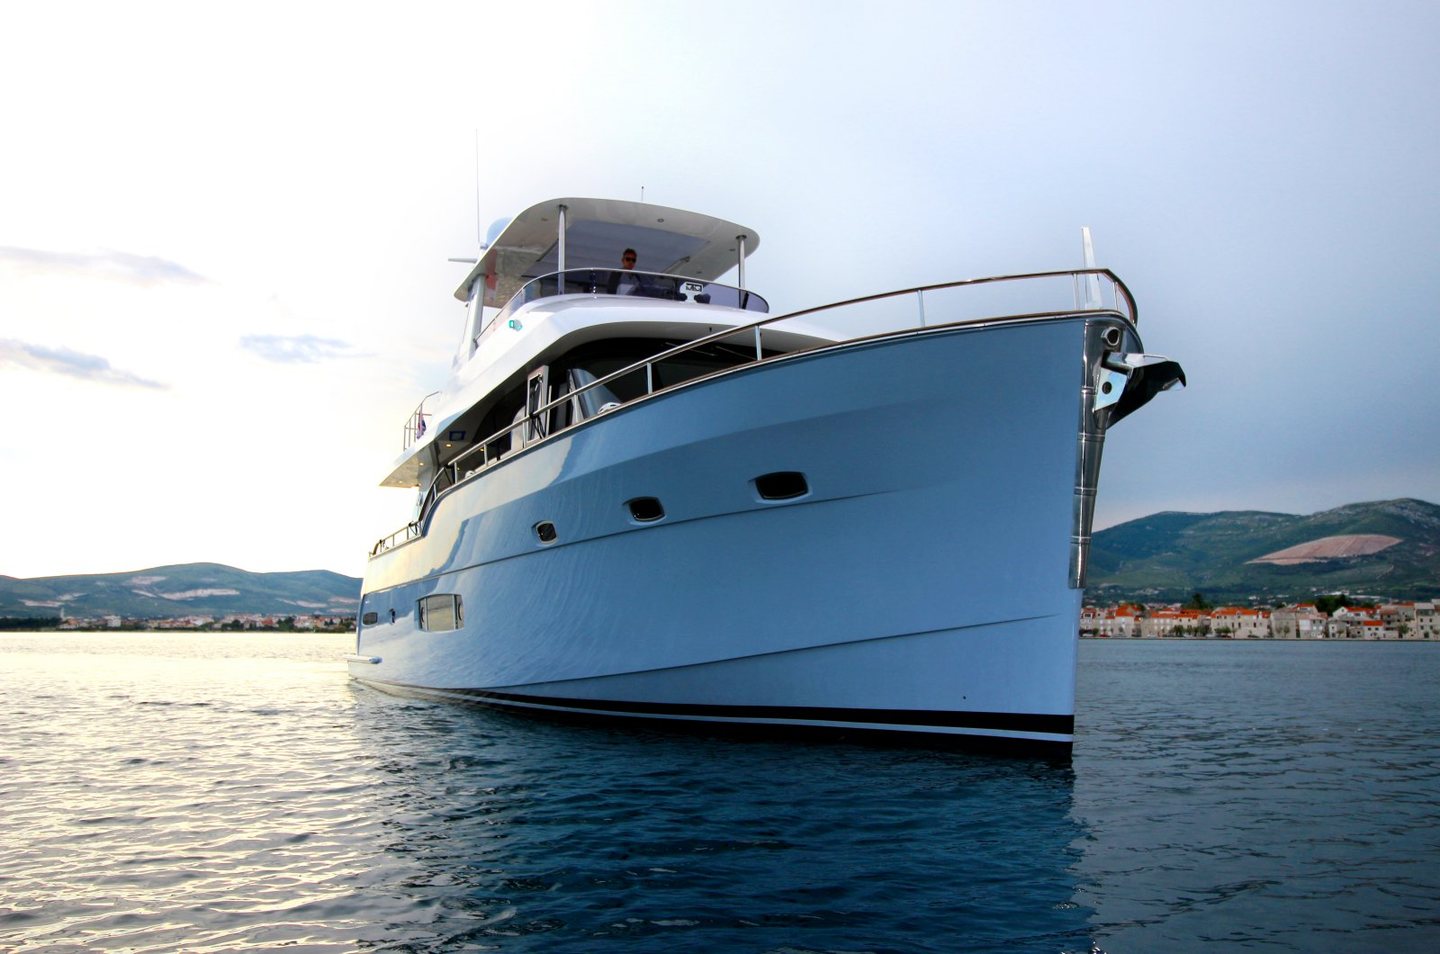 360 VR Virtual Tours of the Outer Reef 620 Trident